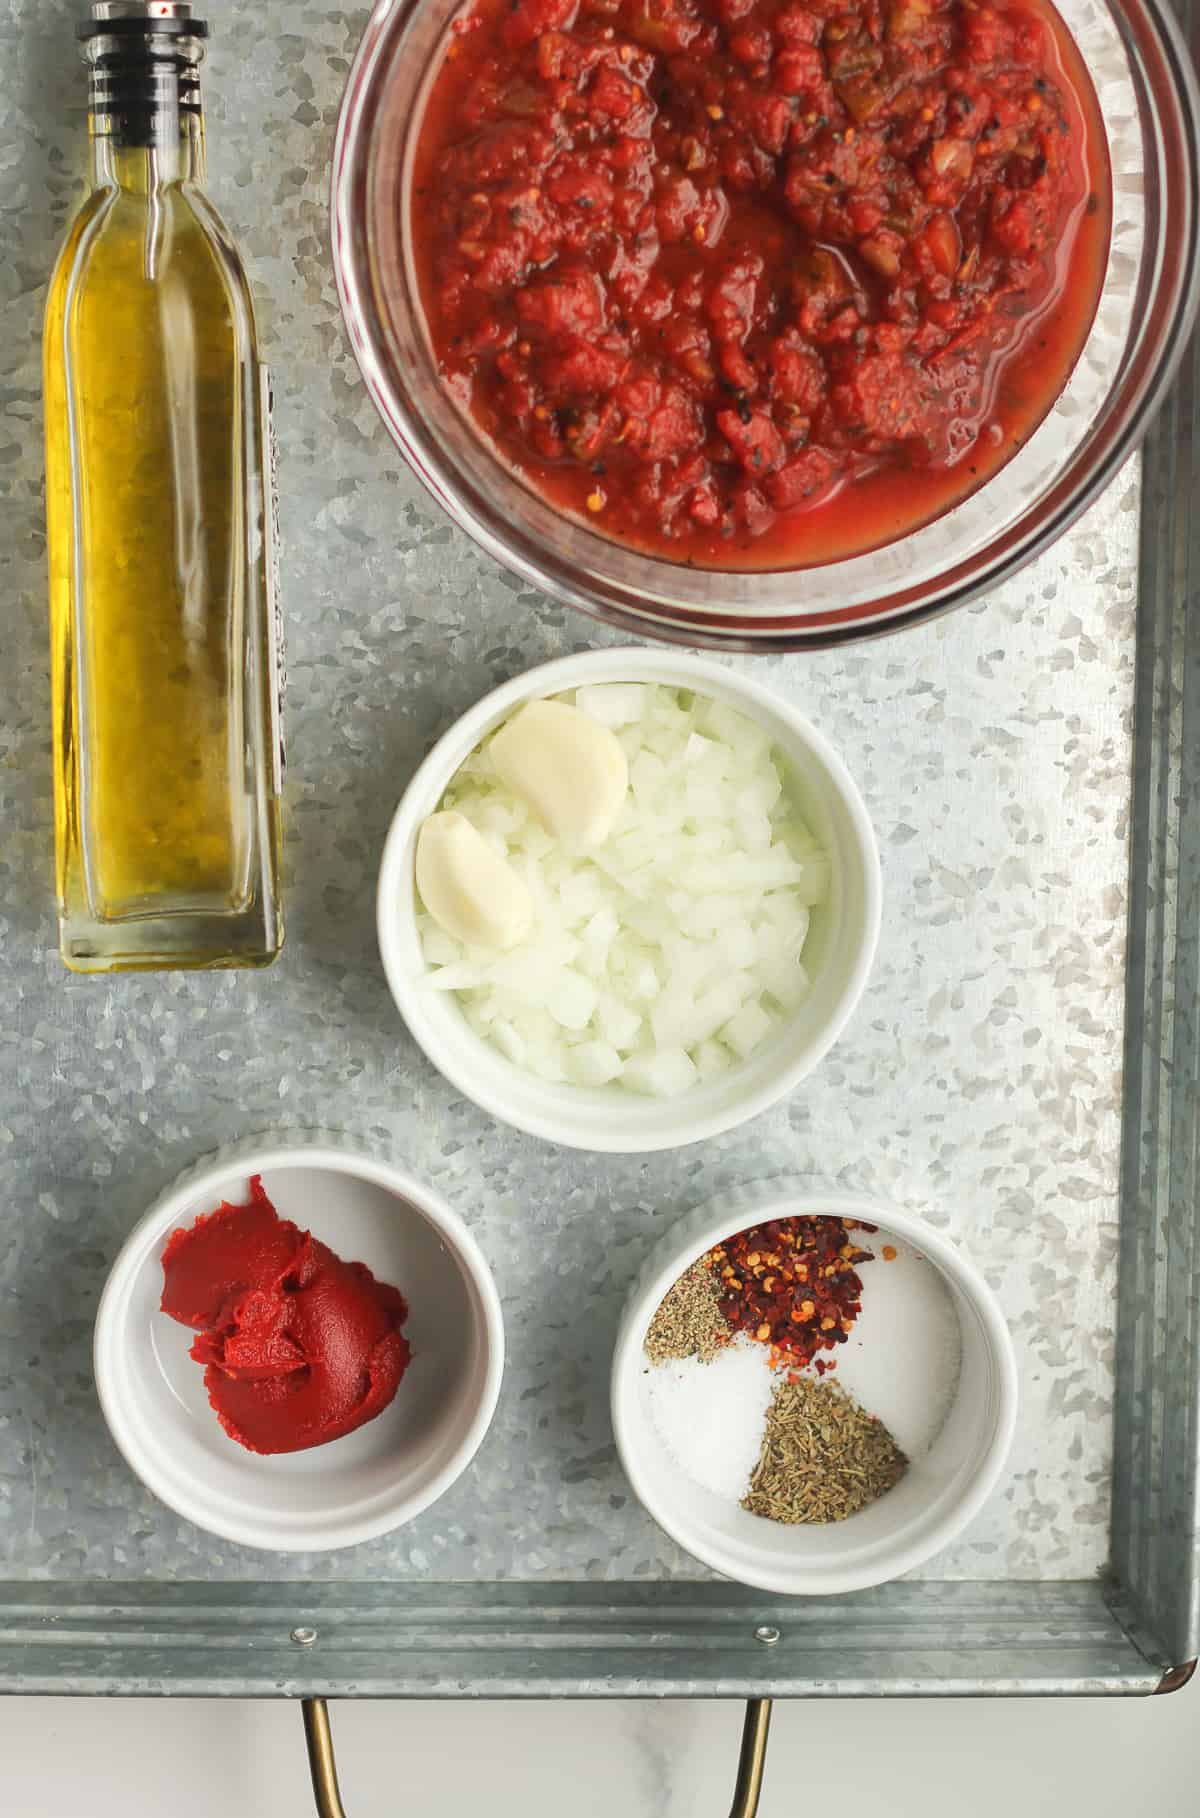 Ingredients for homemade pizza sauce.